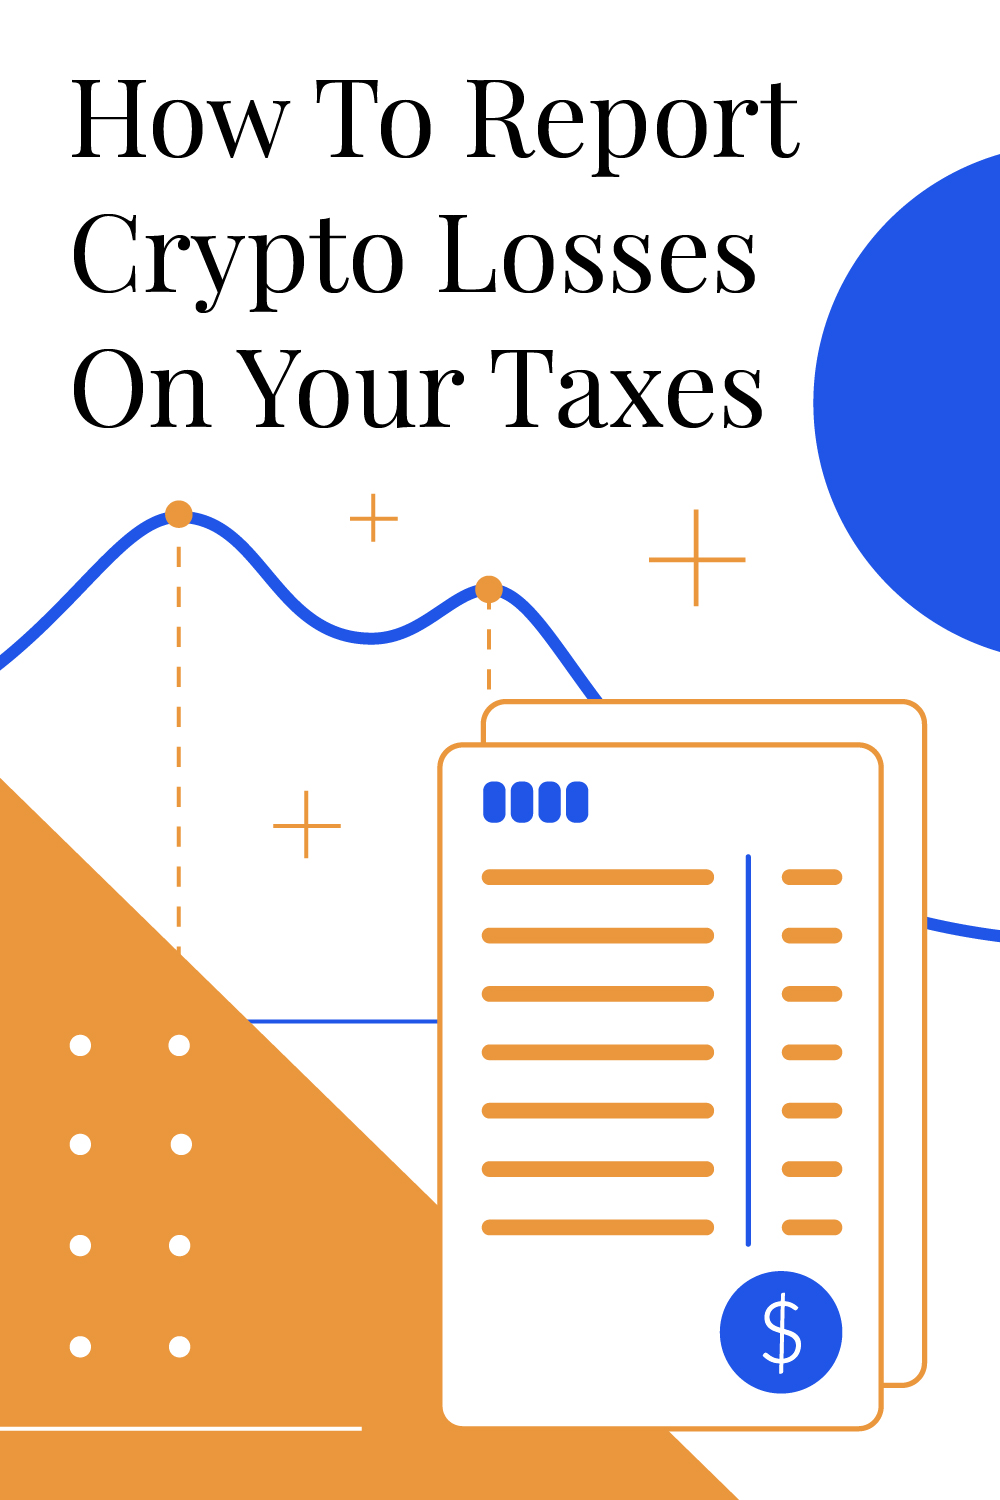 How To Report Crypto Losses On Your Taxes